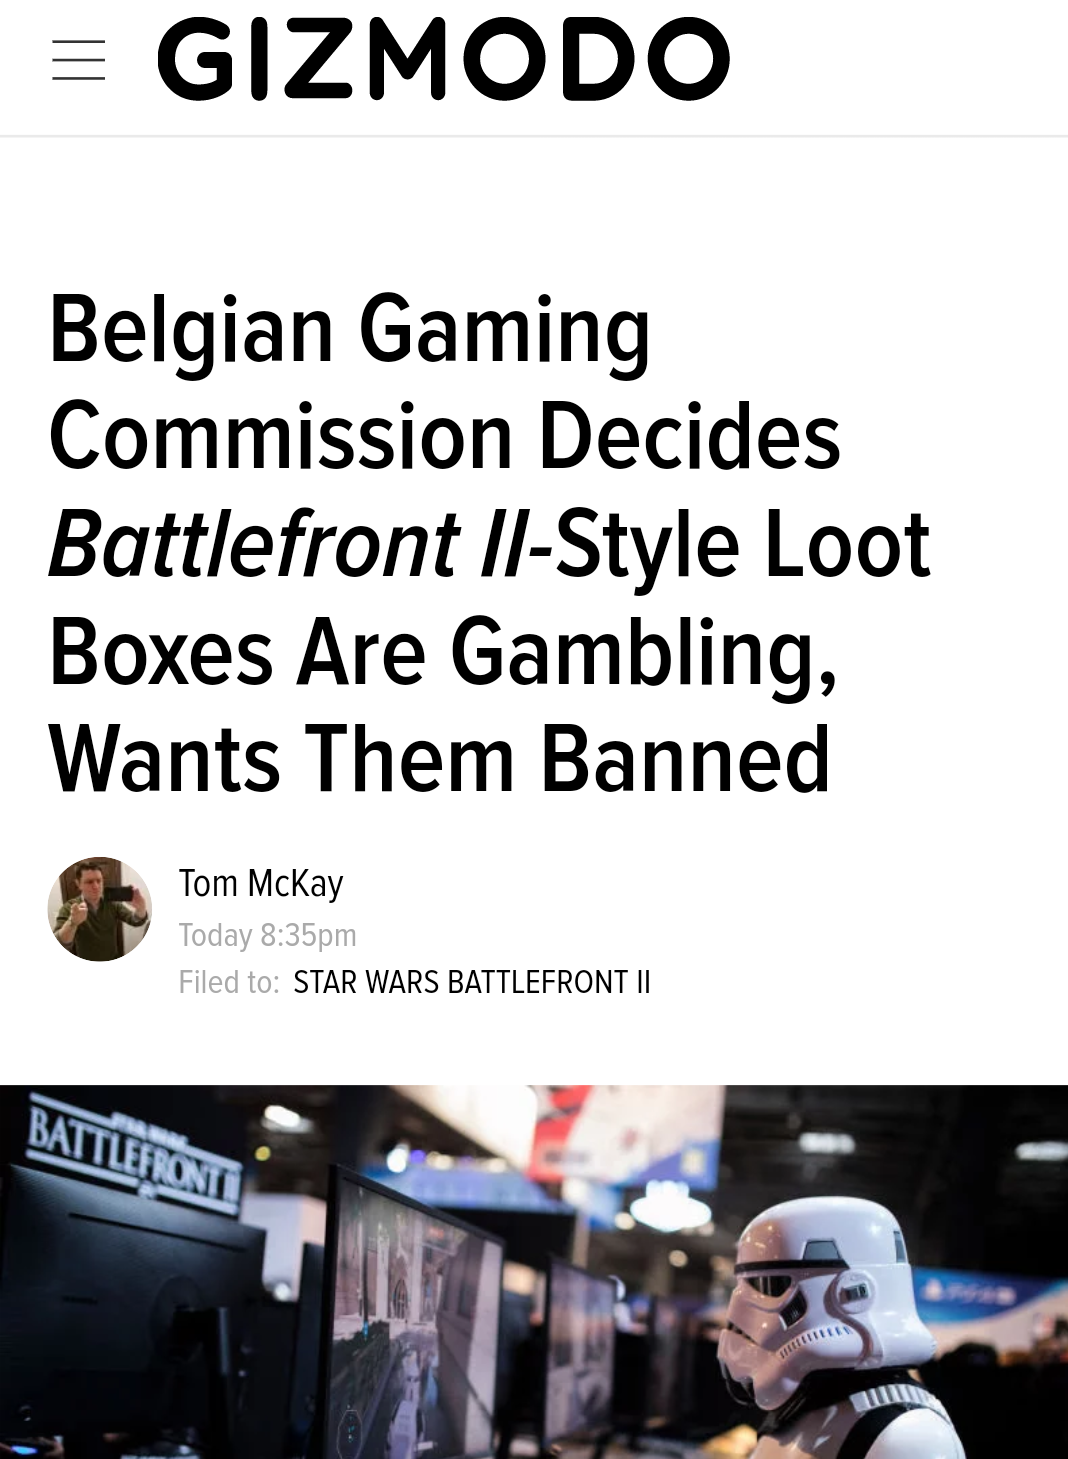 media - Gizmodo Belgian Gaming Commission Decides Battlefront IiStyle Loot Boxes Are Gambling, Wants Them Banned Tom McKay Today pm Filed to Star Wars Battlefront Ii